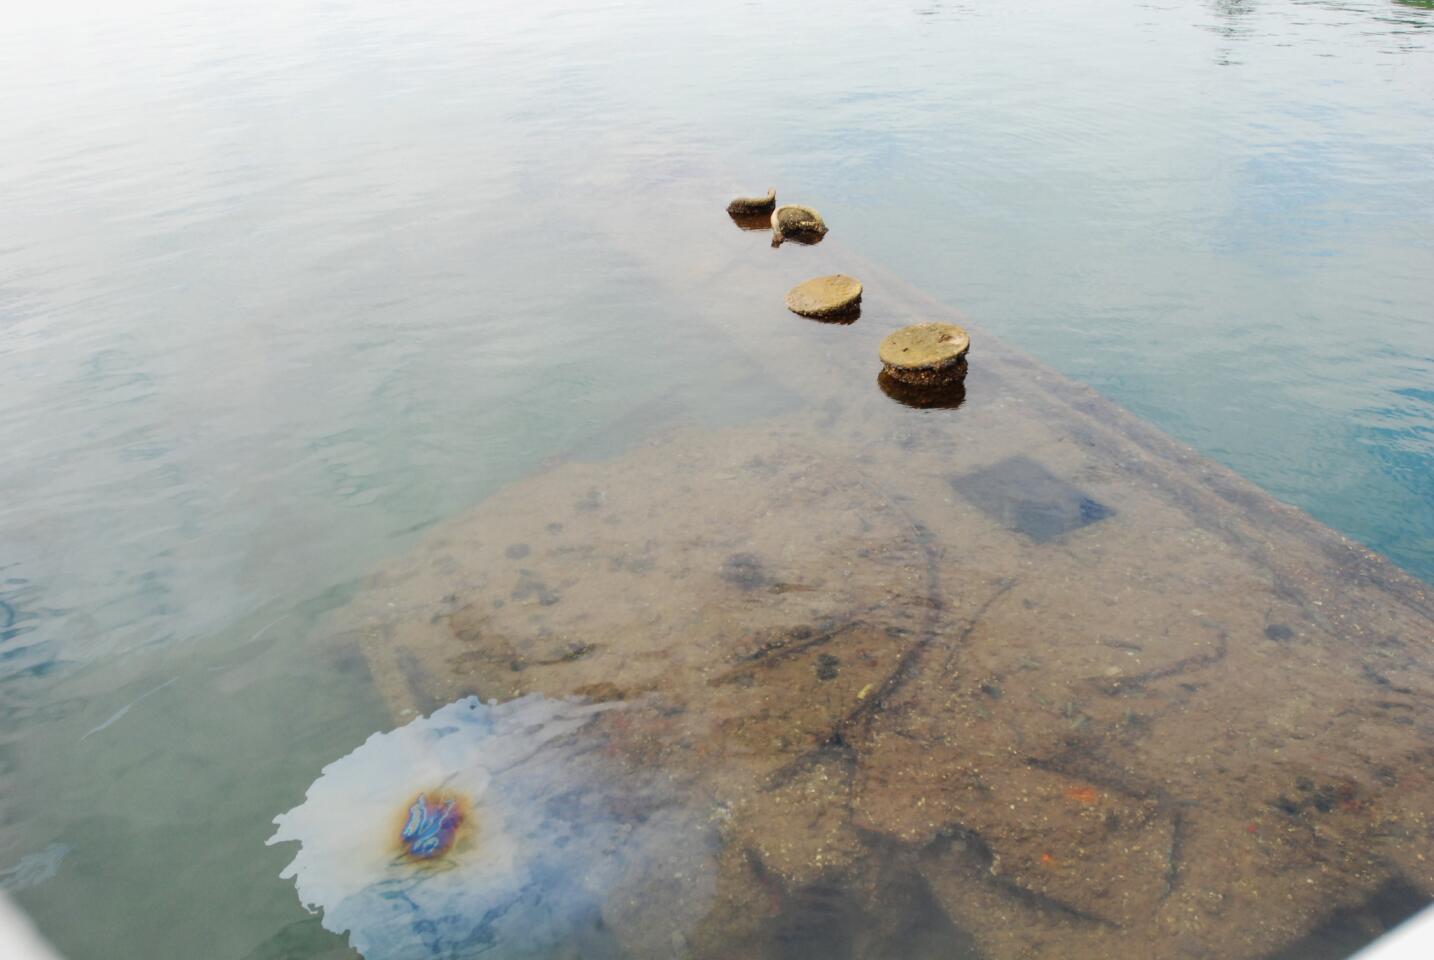 Oil seeps out of the sunken hull of the USS Arizona before a wreath laying ceremony at the memorial to the battleship in Pearl Harbor, Hawaii, Monday, Dec. 7, 2015. Before the wreath-laying, dozens of survivors and about 3,000 others gathered for a memorial ceremony marking the 74th anniversary of the Japanese attack. (AP Photo/Audrey McAvoy)